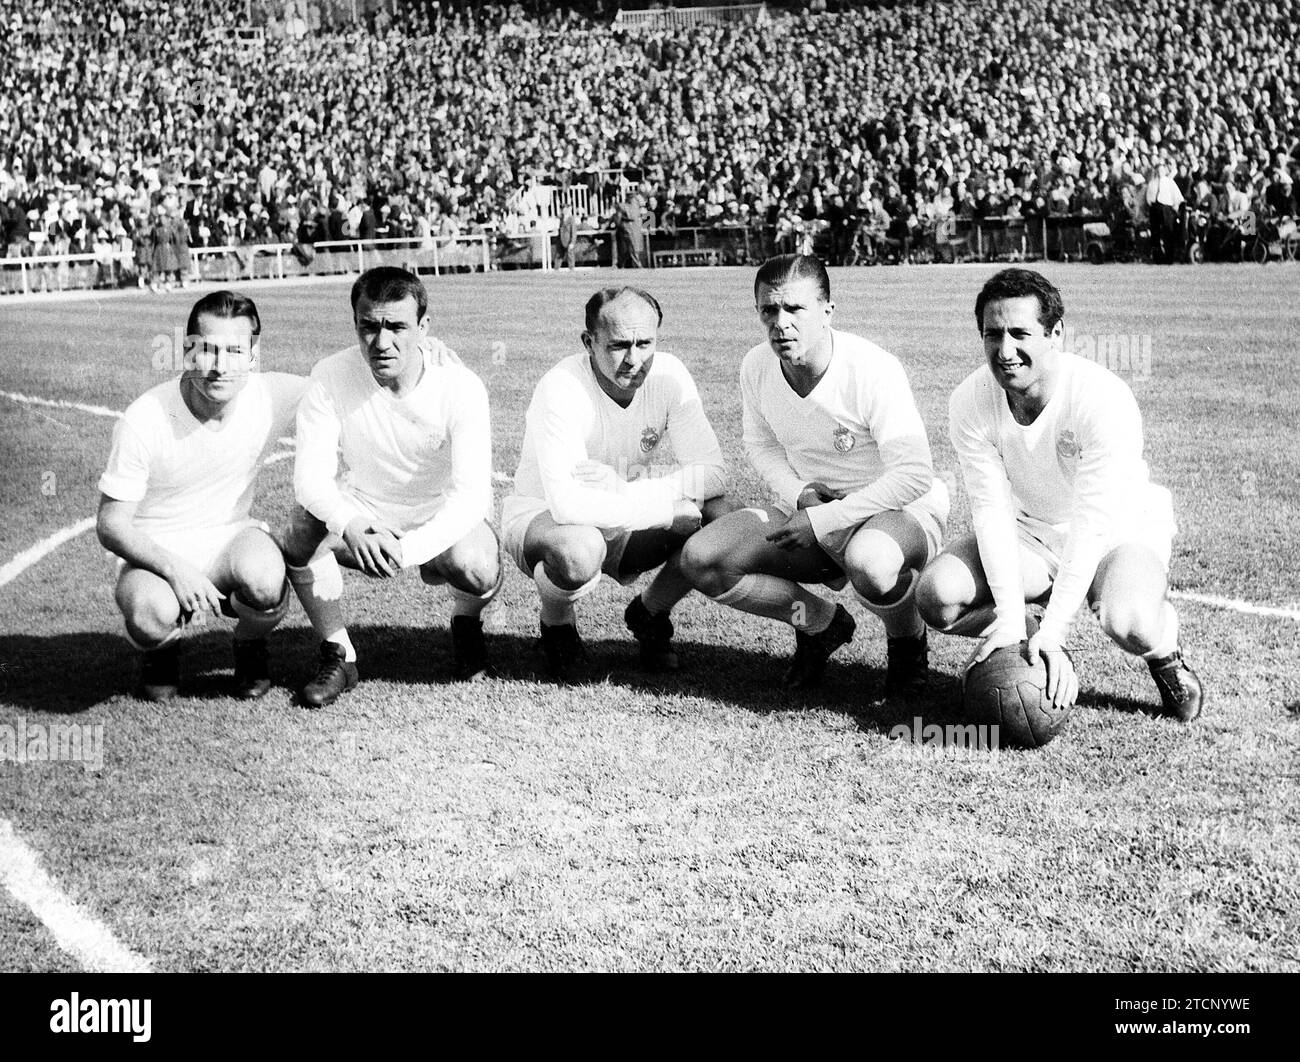 Protagonists - Players - Lineups - Forward that Real Madrid presented in the final that they won in 1962 against Sevilla. Tejadar, del Sol, Di Stefano, Puskas and Gento. Photo: Álvaro -Approximate date. Credit: Album / Archivo ABC / Álvaro Stock Photo